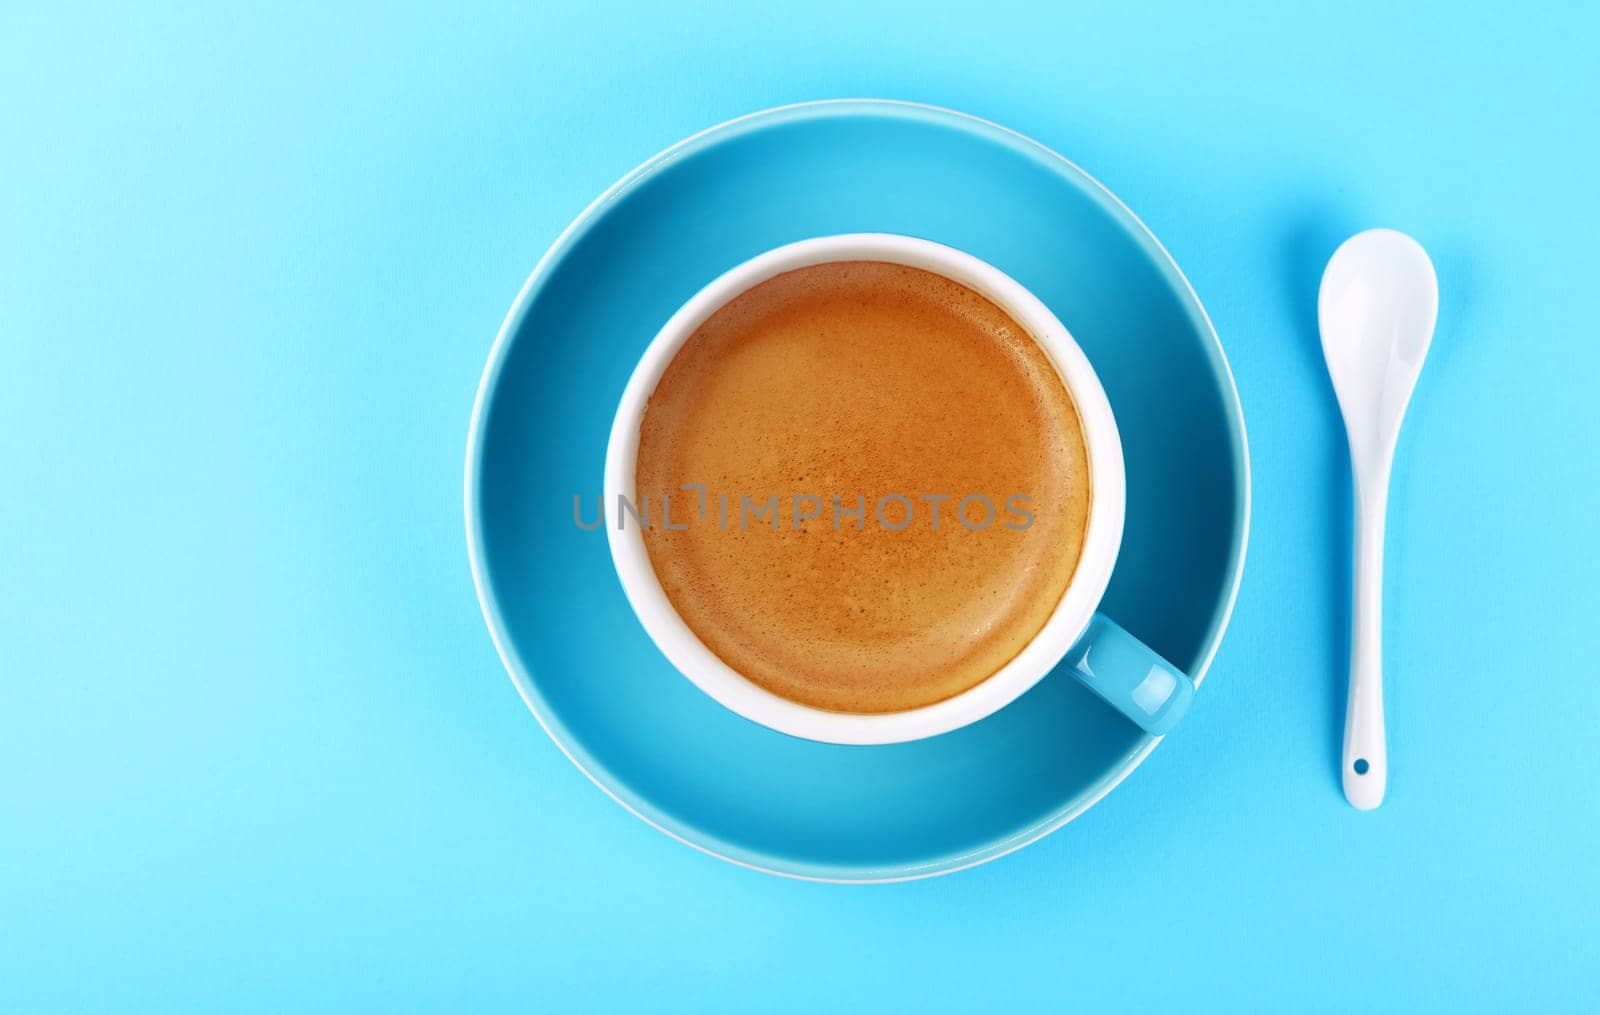 Full cup of espresso coffee on blue paper by BreakingTheWalls